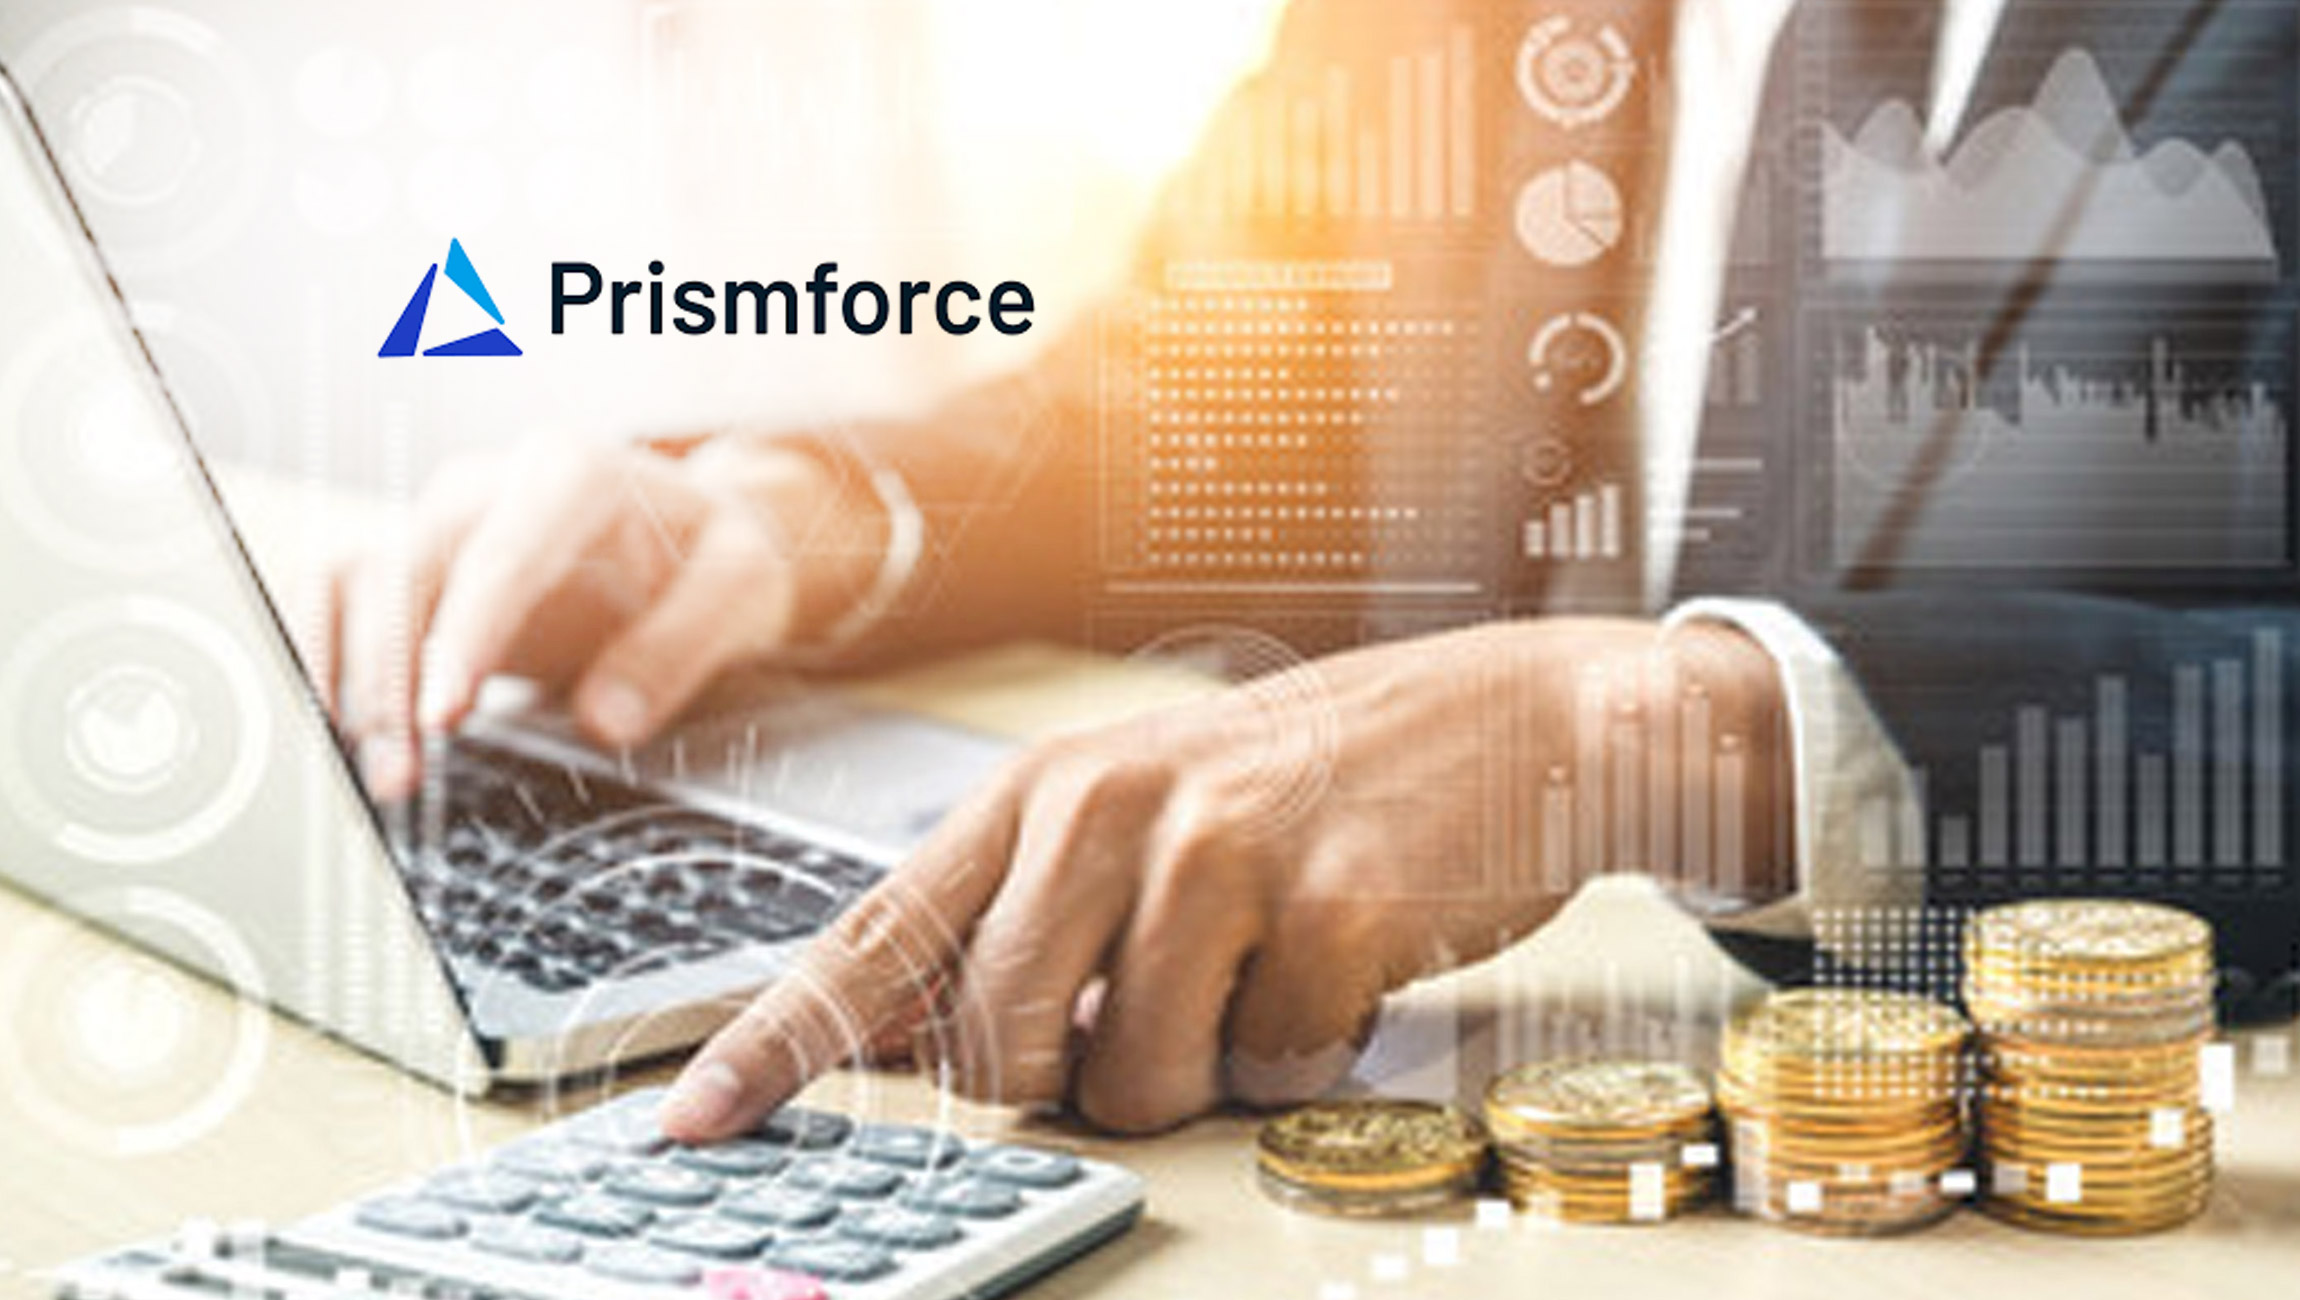 Prismforce, a Vertical SaaS for Tech Services, Raises $13.6 Million in Series A Round Led by Sequoia Capital India